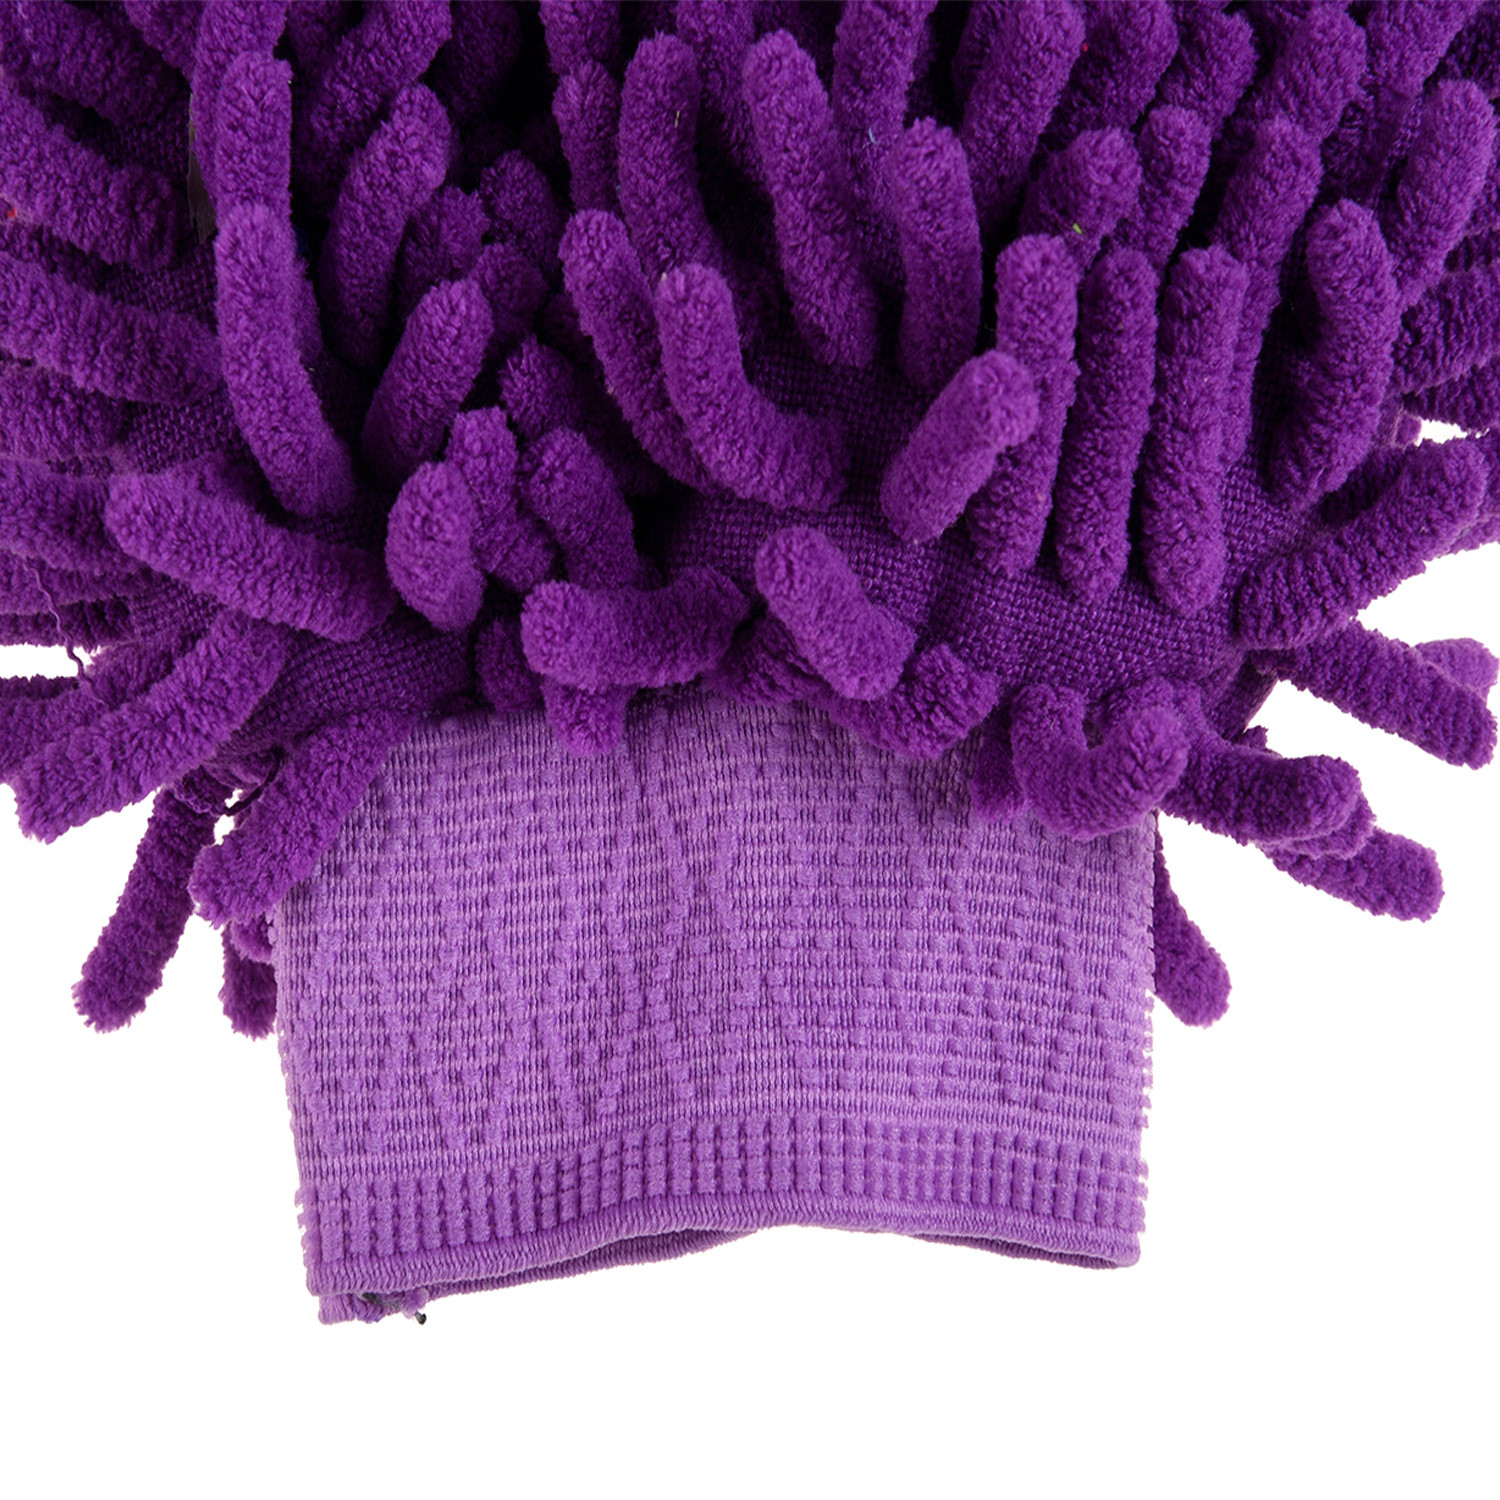 Kuber Industries Chenille Mitts|Microfiber Cleaning Gloves|Inside Waterproof Cloth Gloves|100 Gram Weighted Hand Duster|Chenille Gloves For Car|Glass|Pack of 2 (Purple & Red)